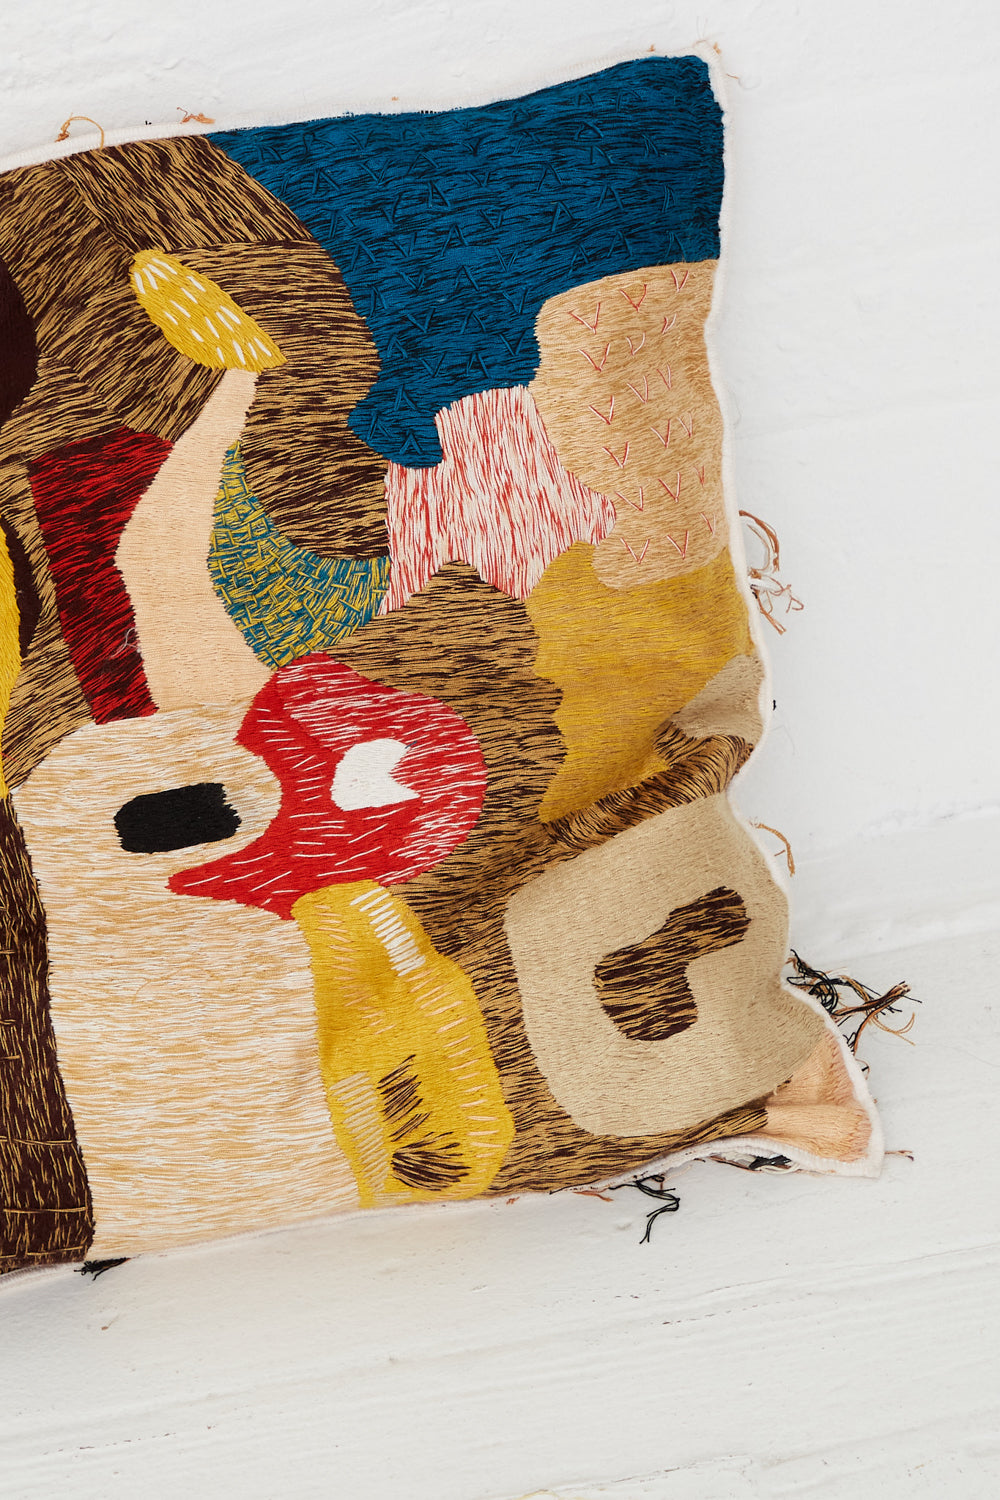 A Complex Embroidery Cave Cushion by Luna Del Pinal with a colorful hand embroidery design on it.